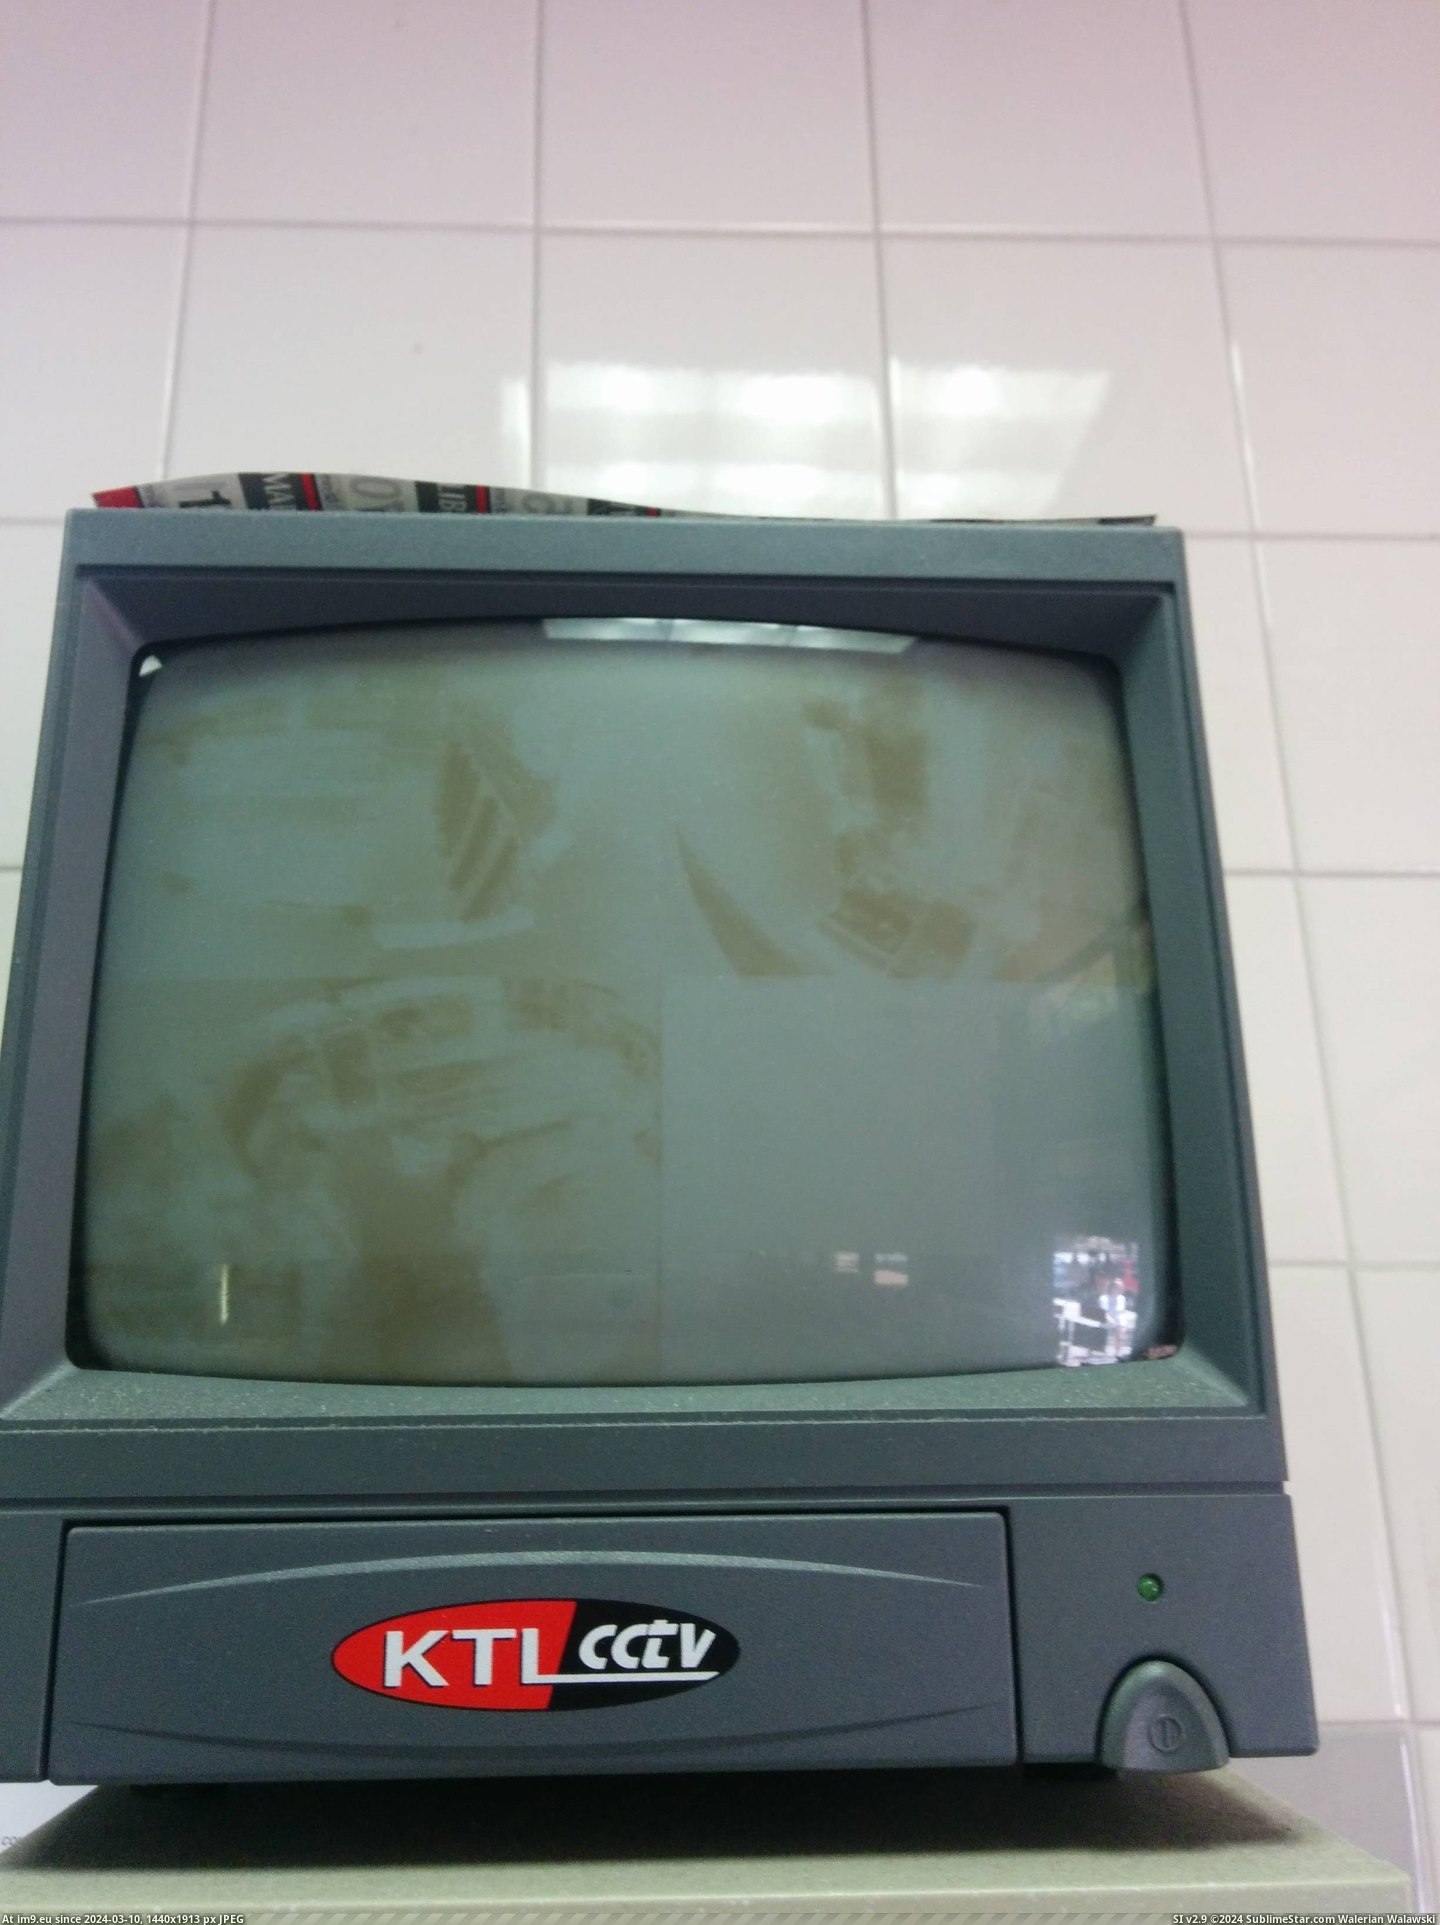 #Images #Long #Security #Burned #Store #Camera [Mildlyinteresting] This security camera TV has been on so long the images of the store have been burned in. Pic. (Image of album My r/MILDLYINTERESTING favs))